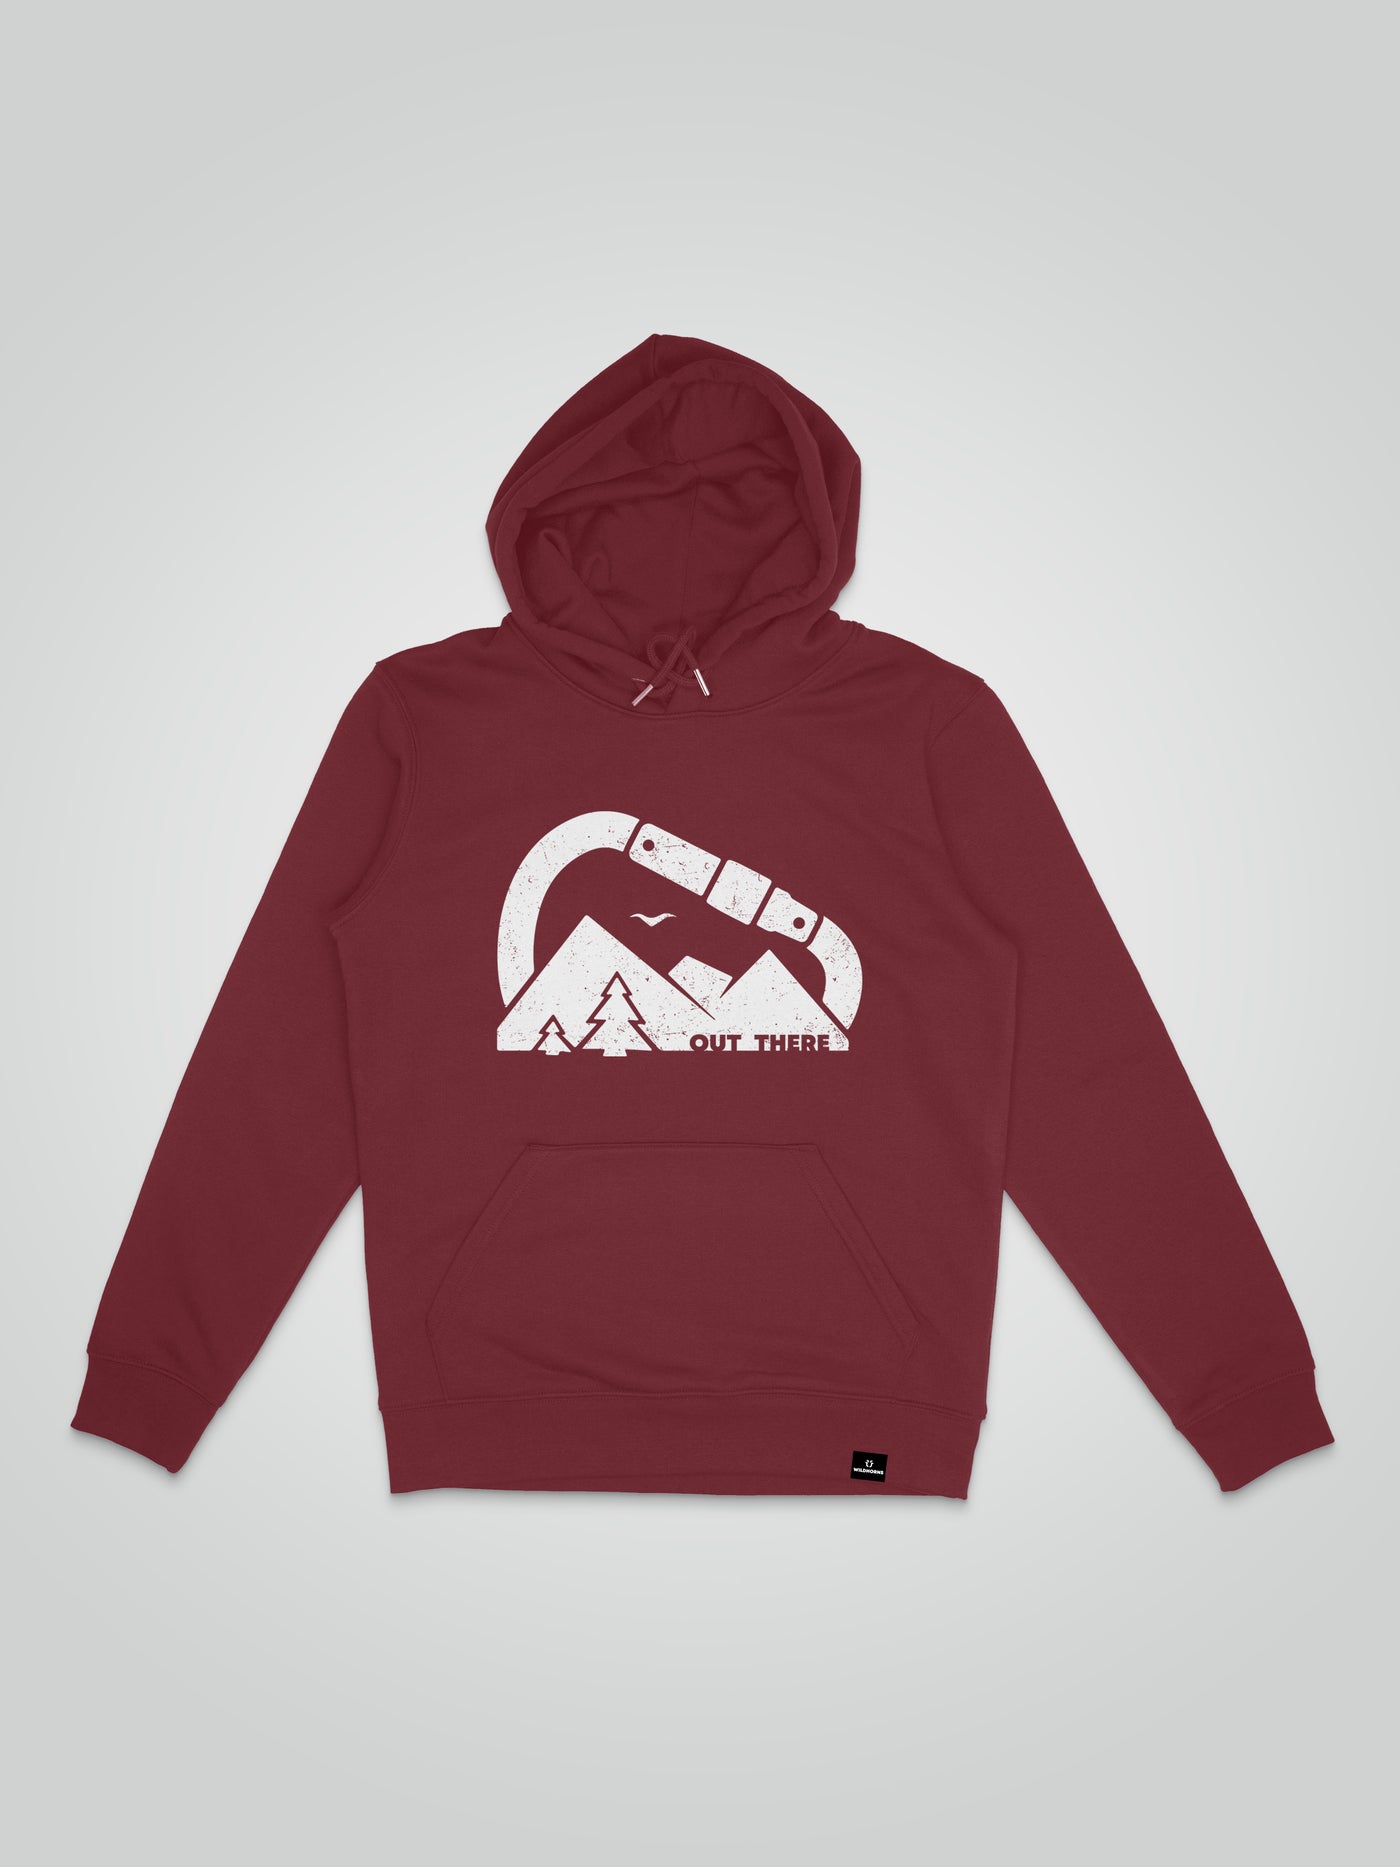 Out There - Unisex Hoodie